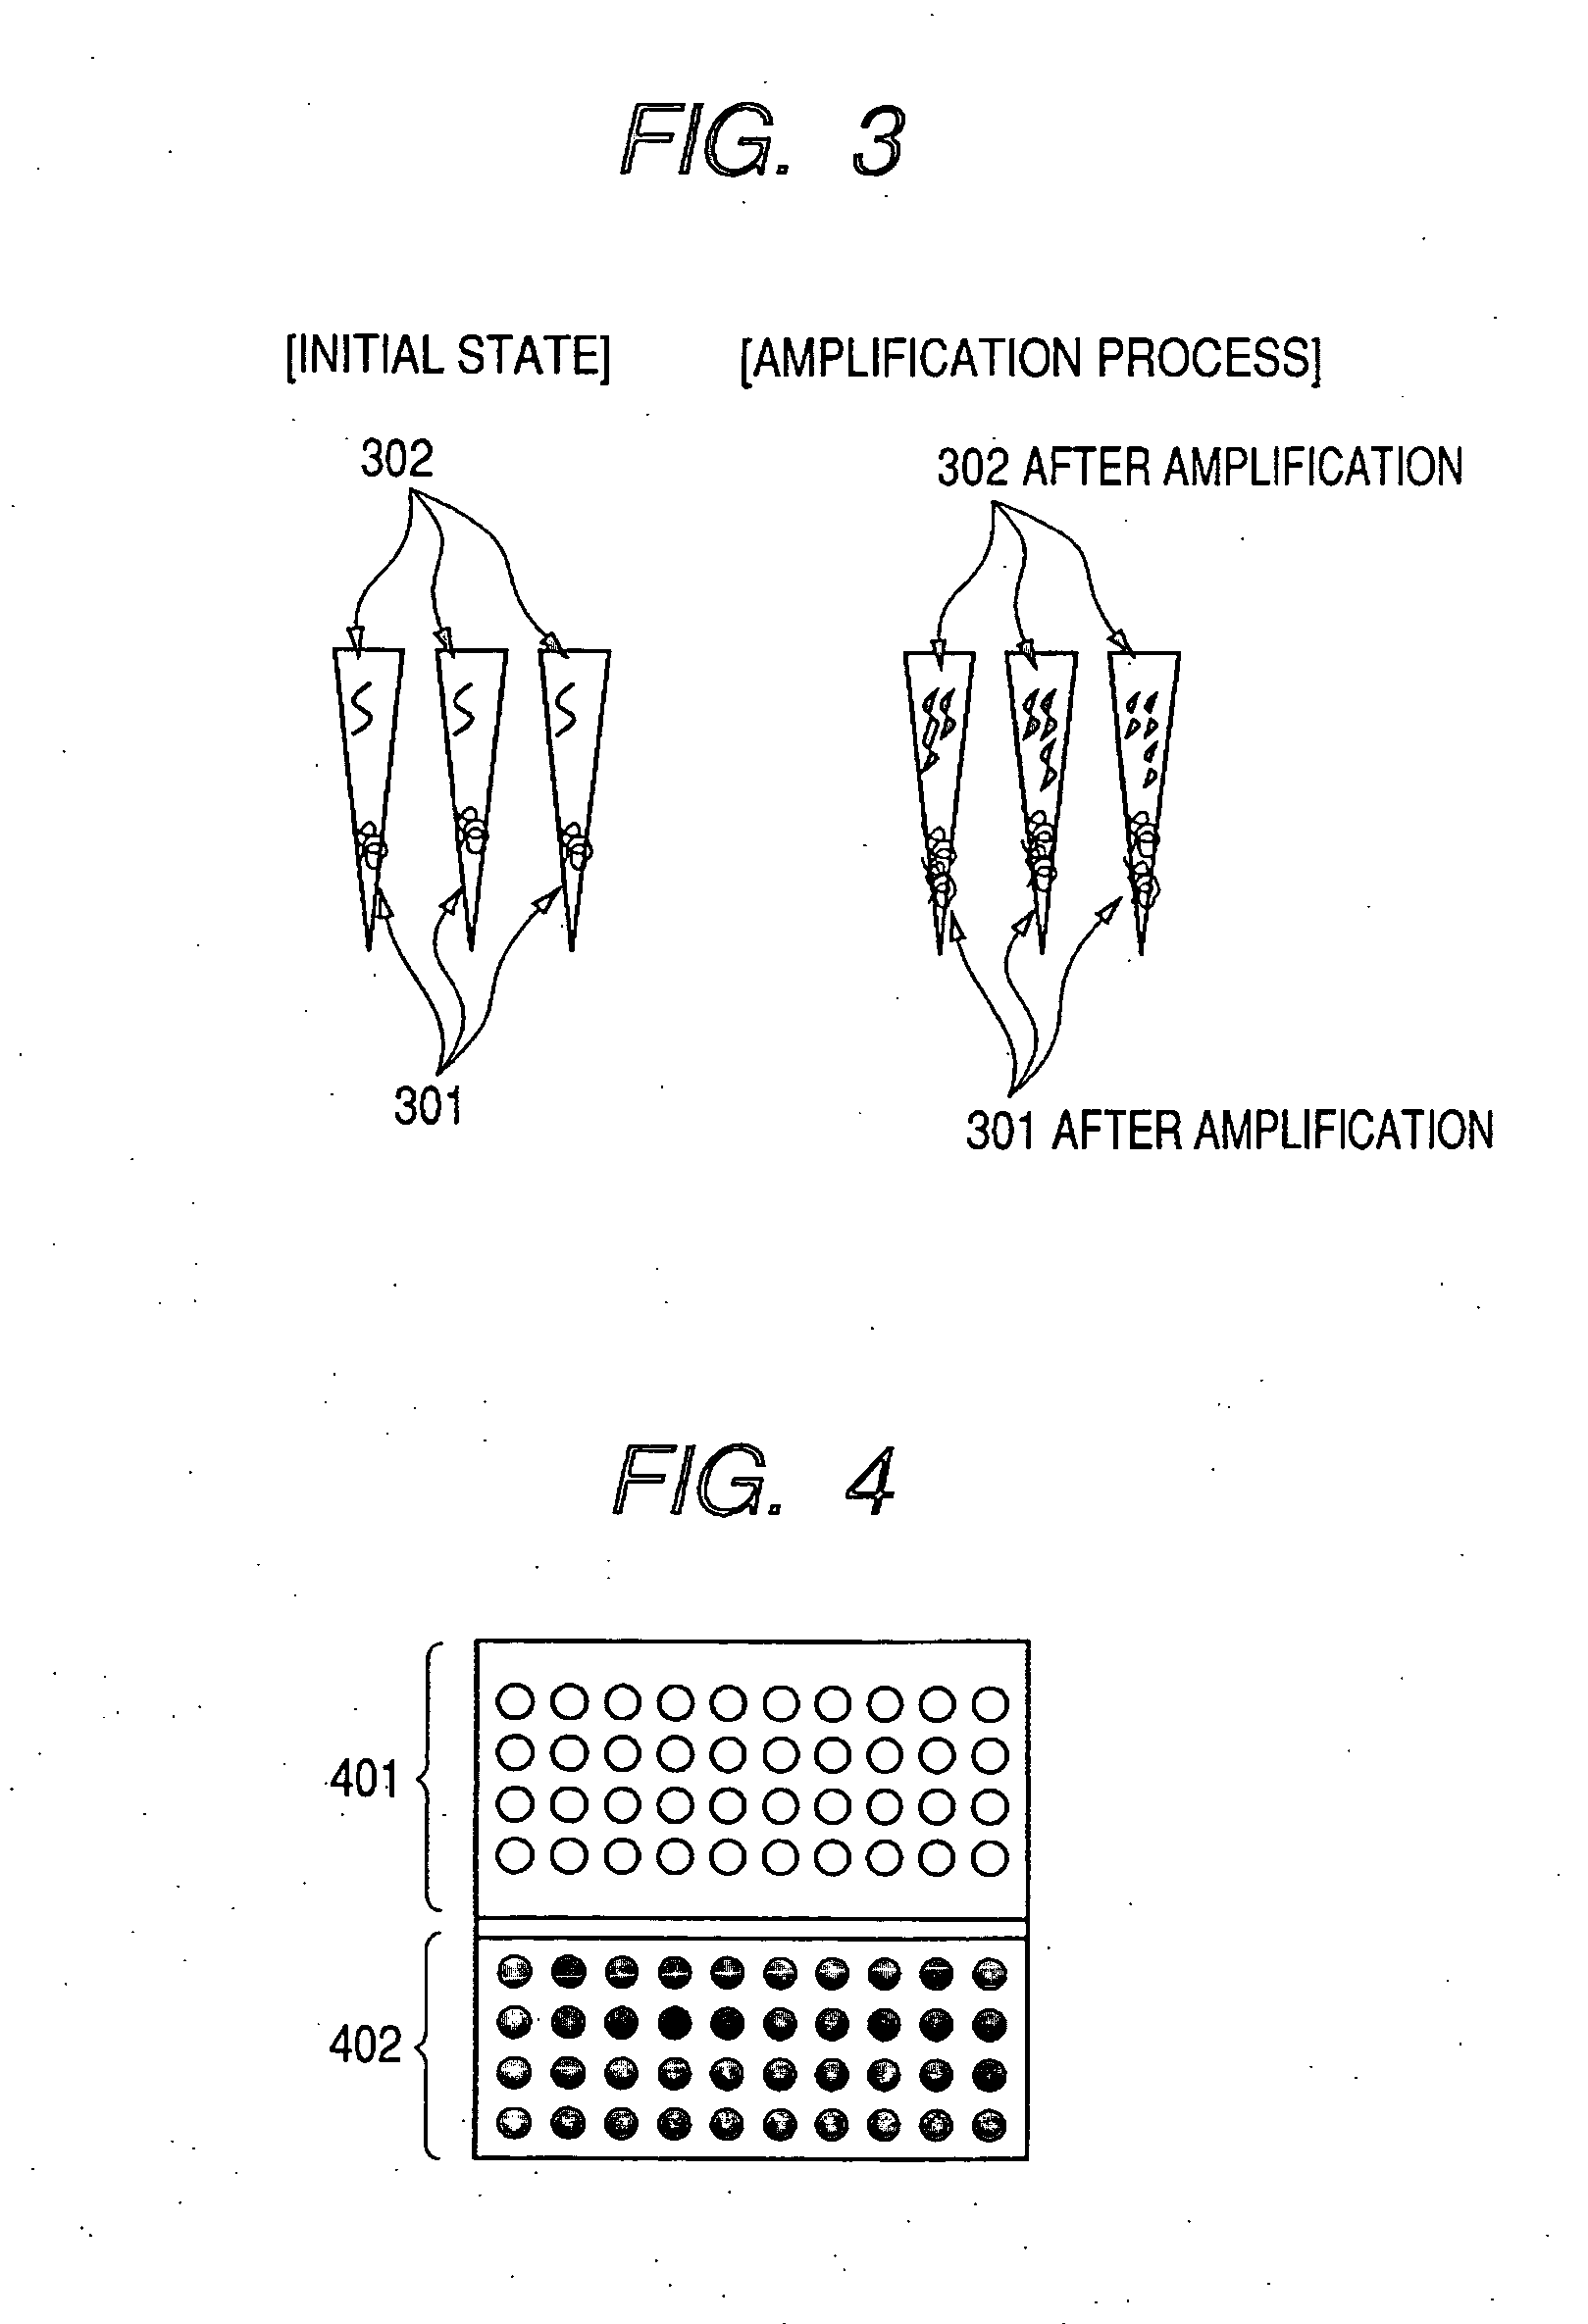 Identifier and nucleic acid amplification method of verification using the same